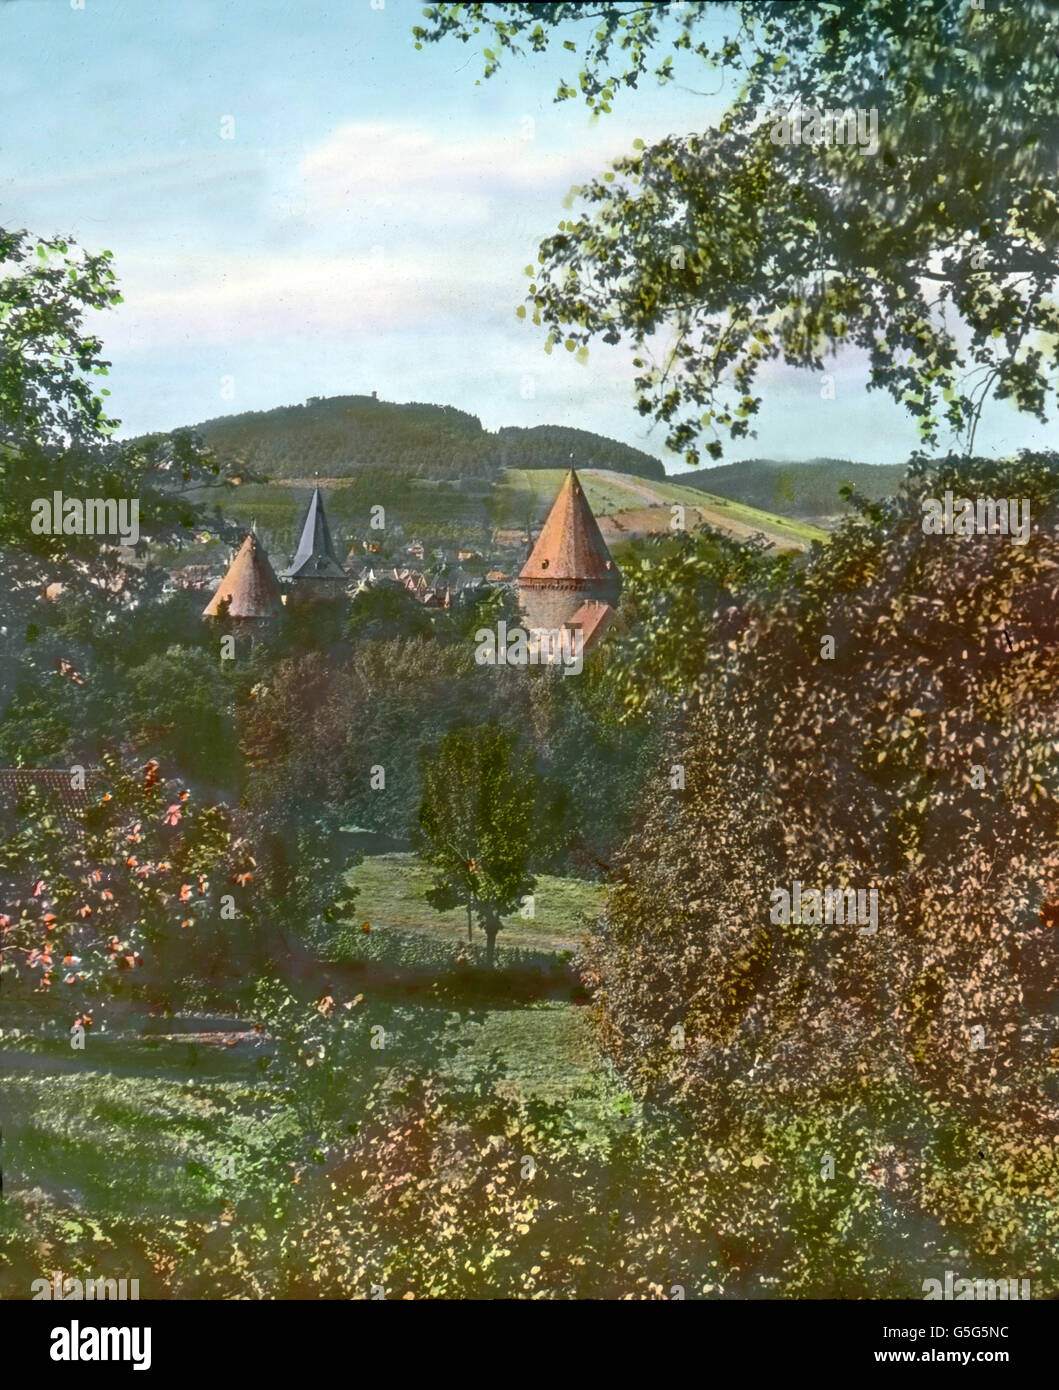 Ein Blick auf die Stadt Goslar. The city of Goslar in the Harz region. Europe, Germany, landscape, mountain range, history, historical, 1910s, 1920s, 20th century, archive, Carl Simon, sprijngtime, panorama, city, town, tower, medieval, trees, hand coloured glass slide Stock Photo